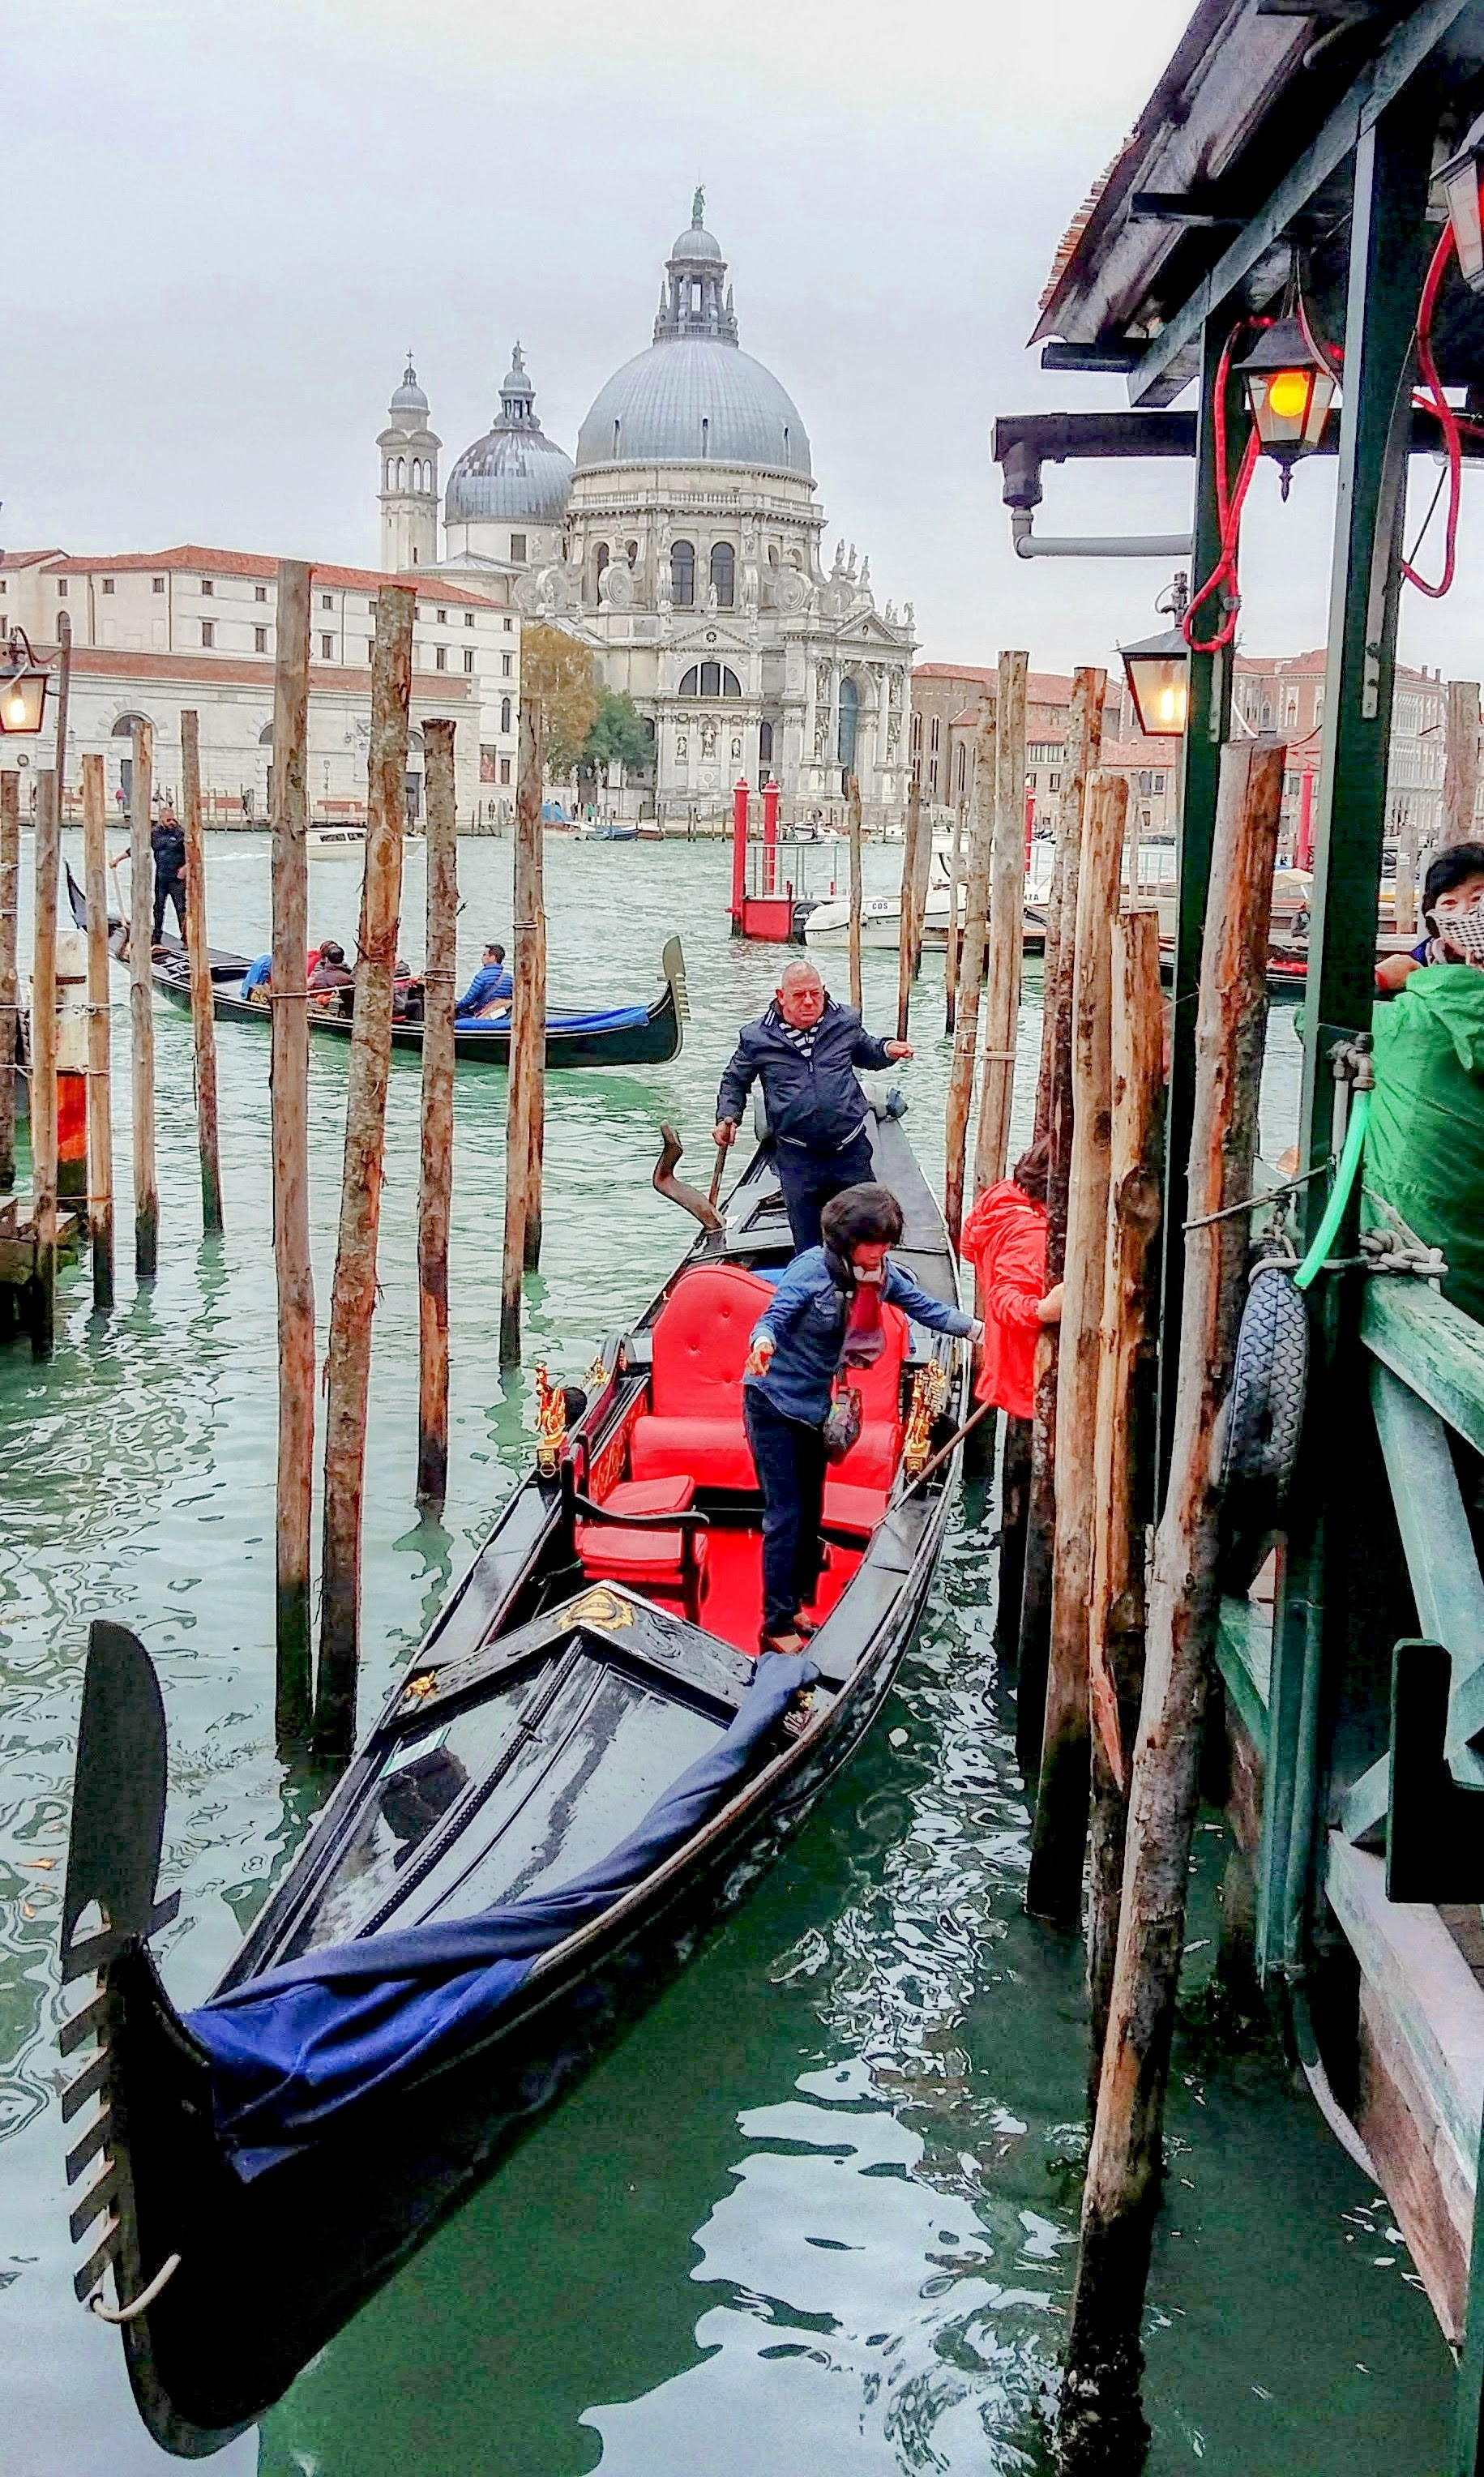 Waiting to get on a gondola, Venice